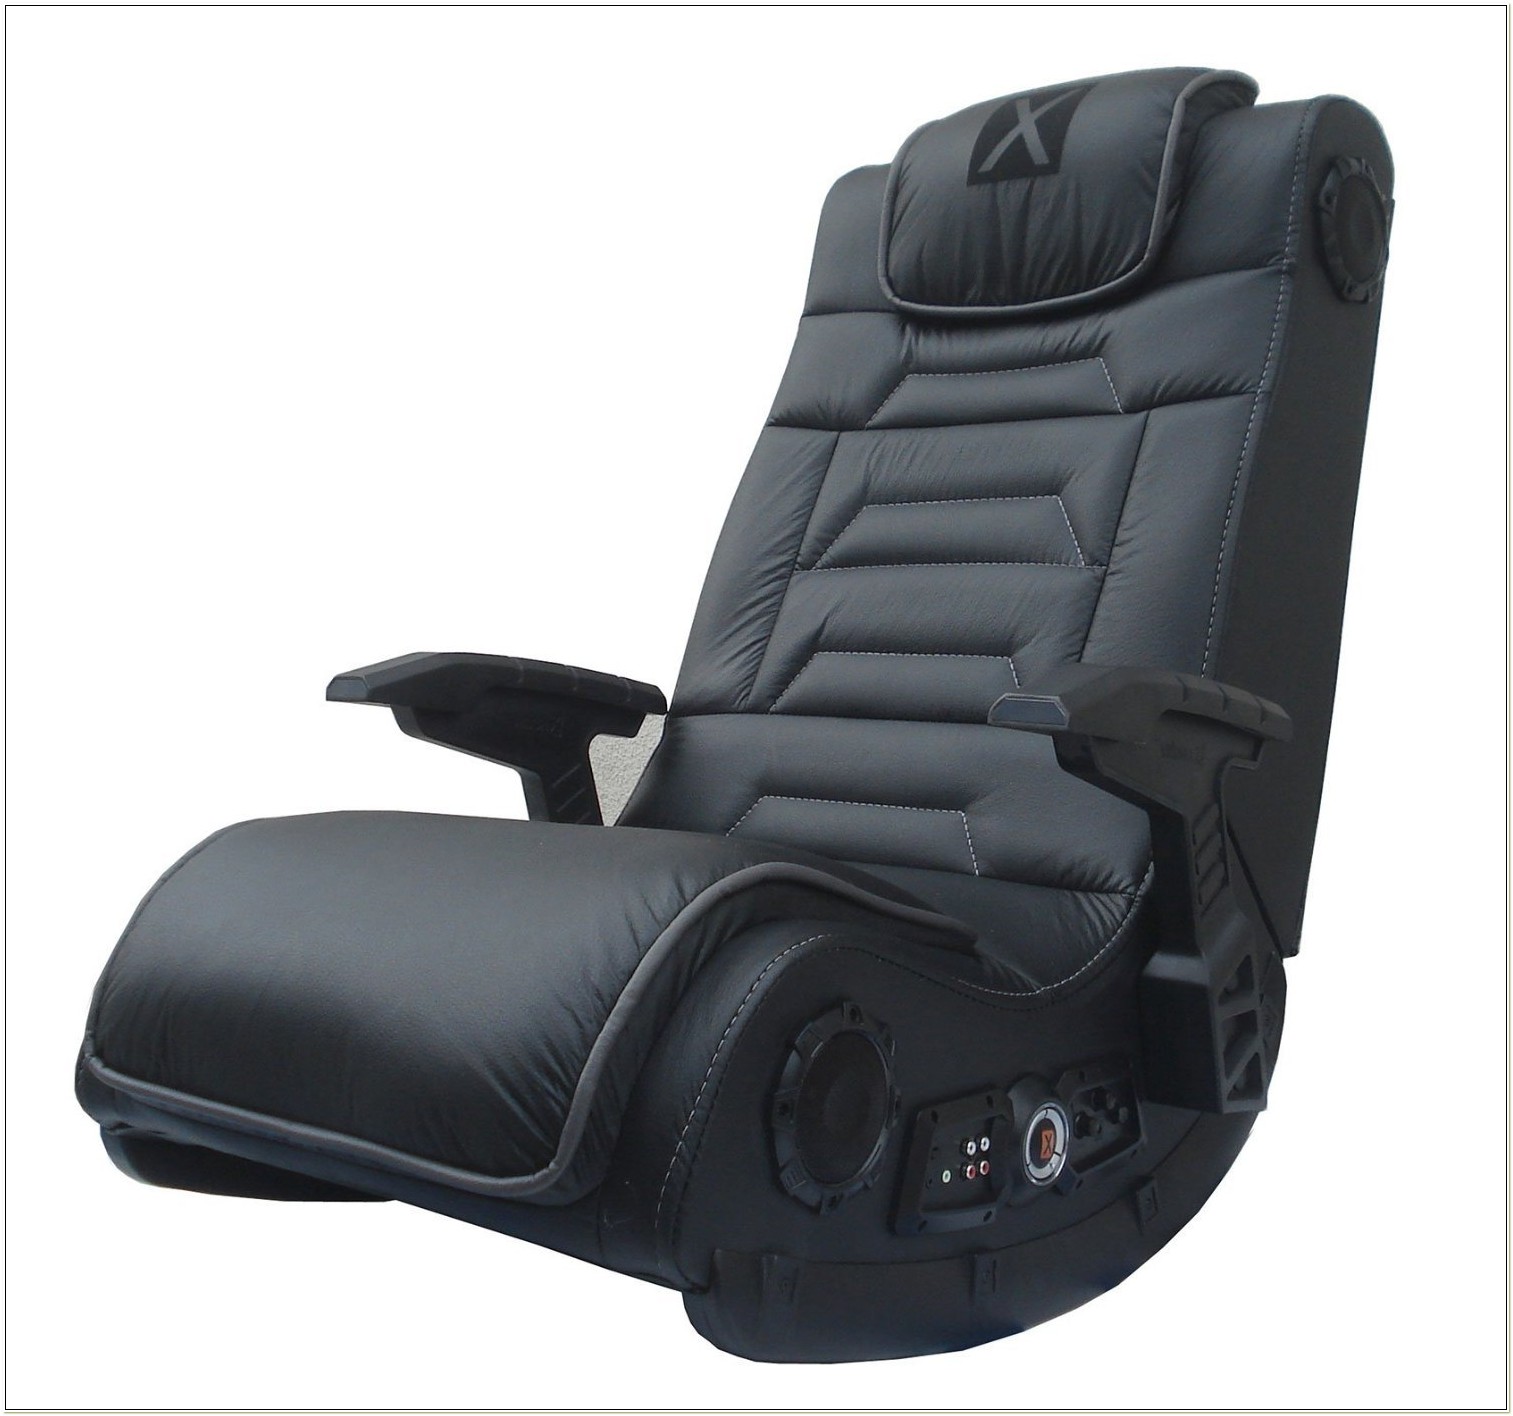 Cheapest X Rocker Pro Gaming Chair - Chairs : Home Decorating Ideas #